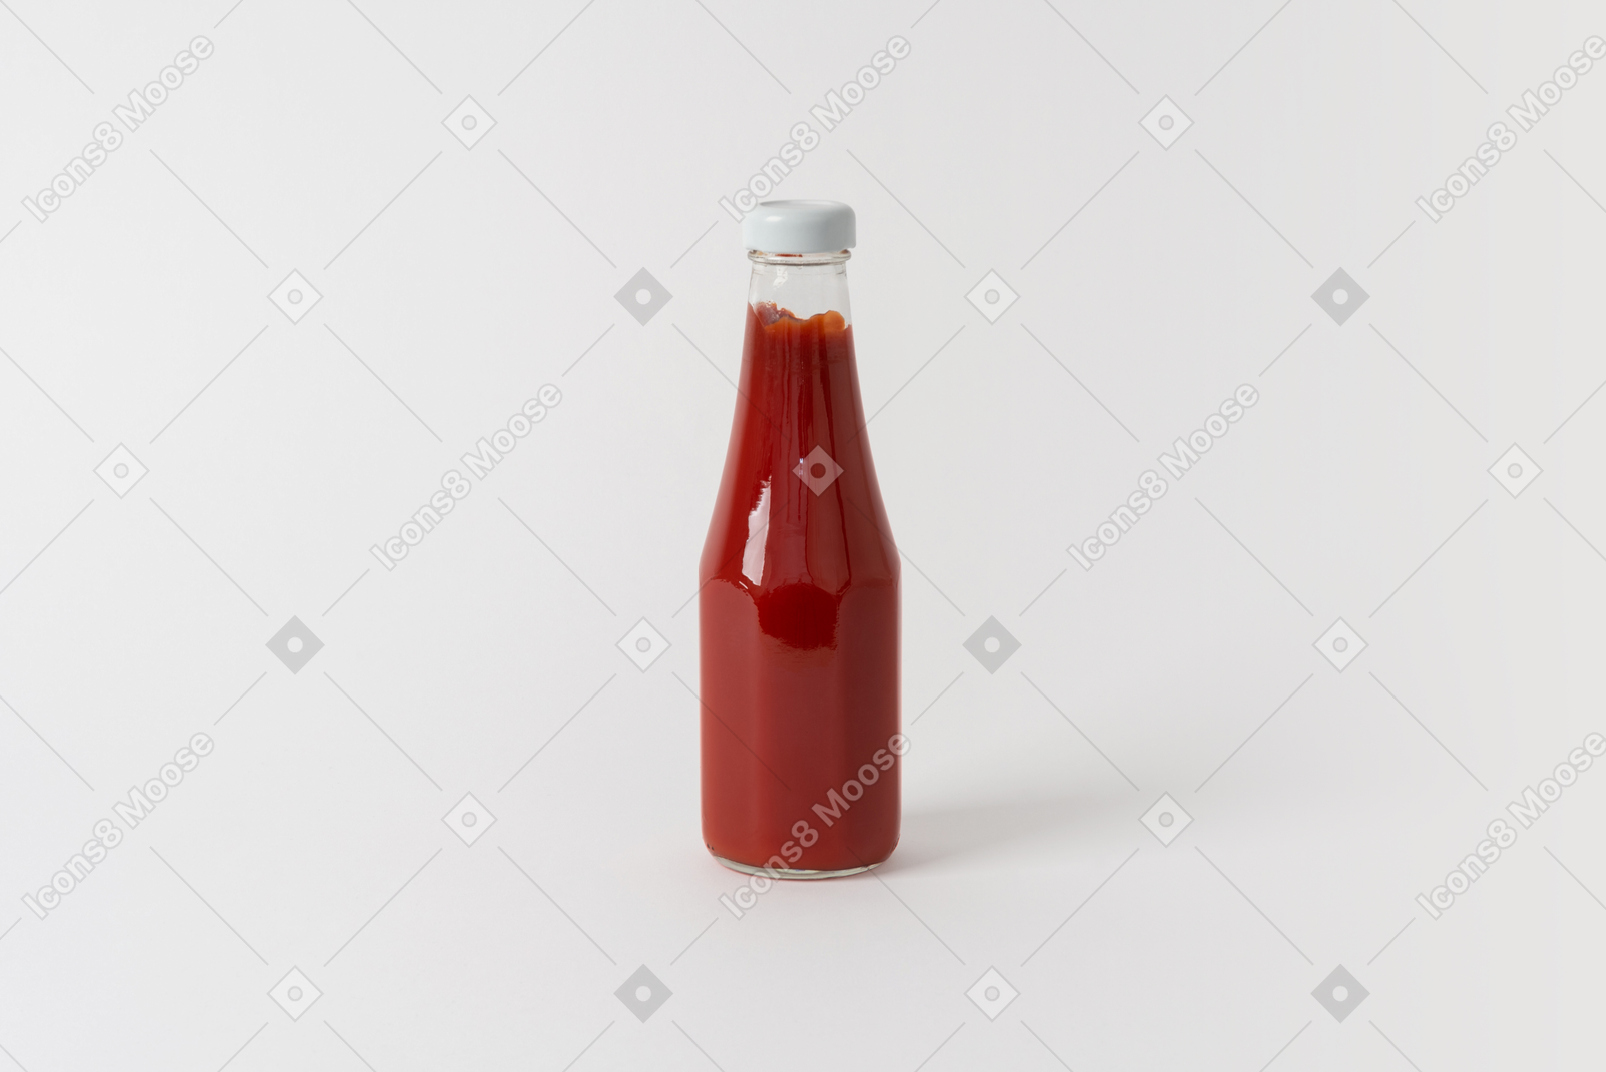 Tomato sauce in a glass bottle